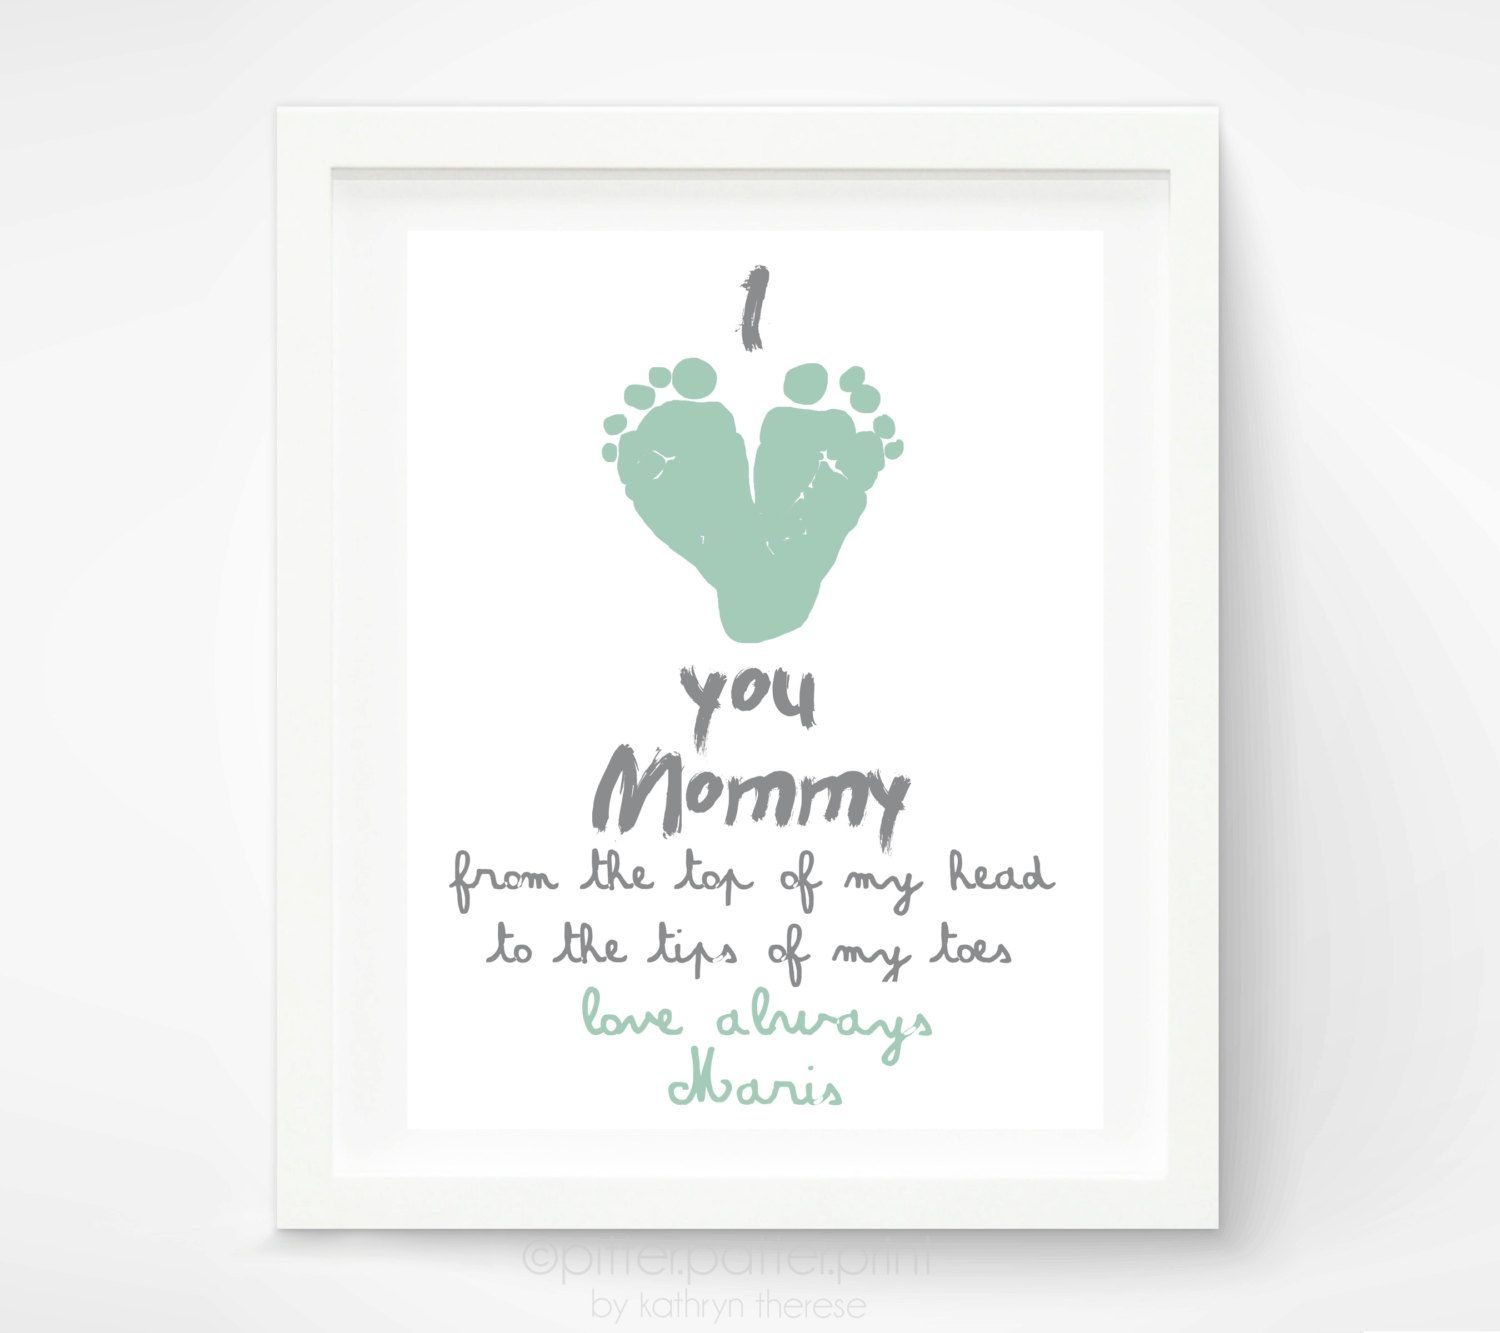 Personalized Mother's Day Gift for New Mom – I Love you Mommy Baby footprint